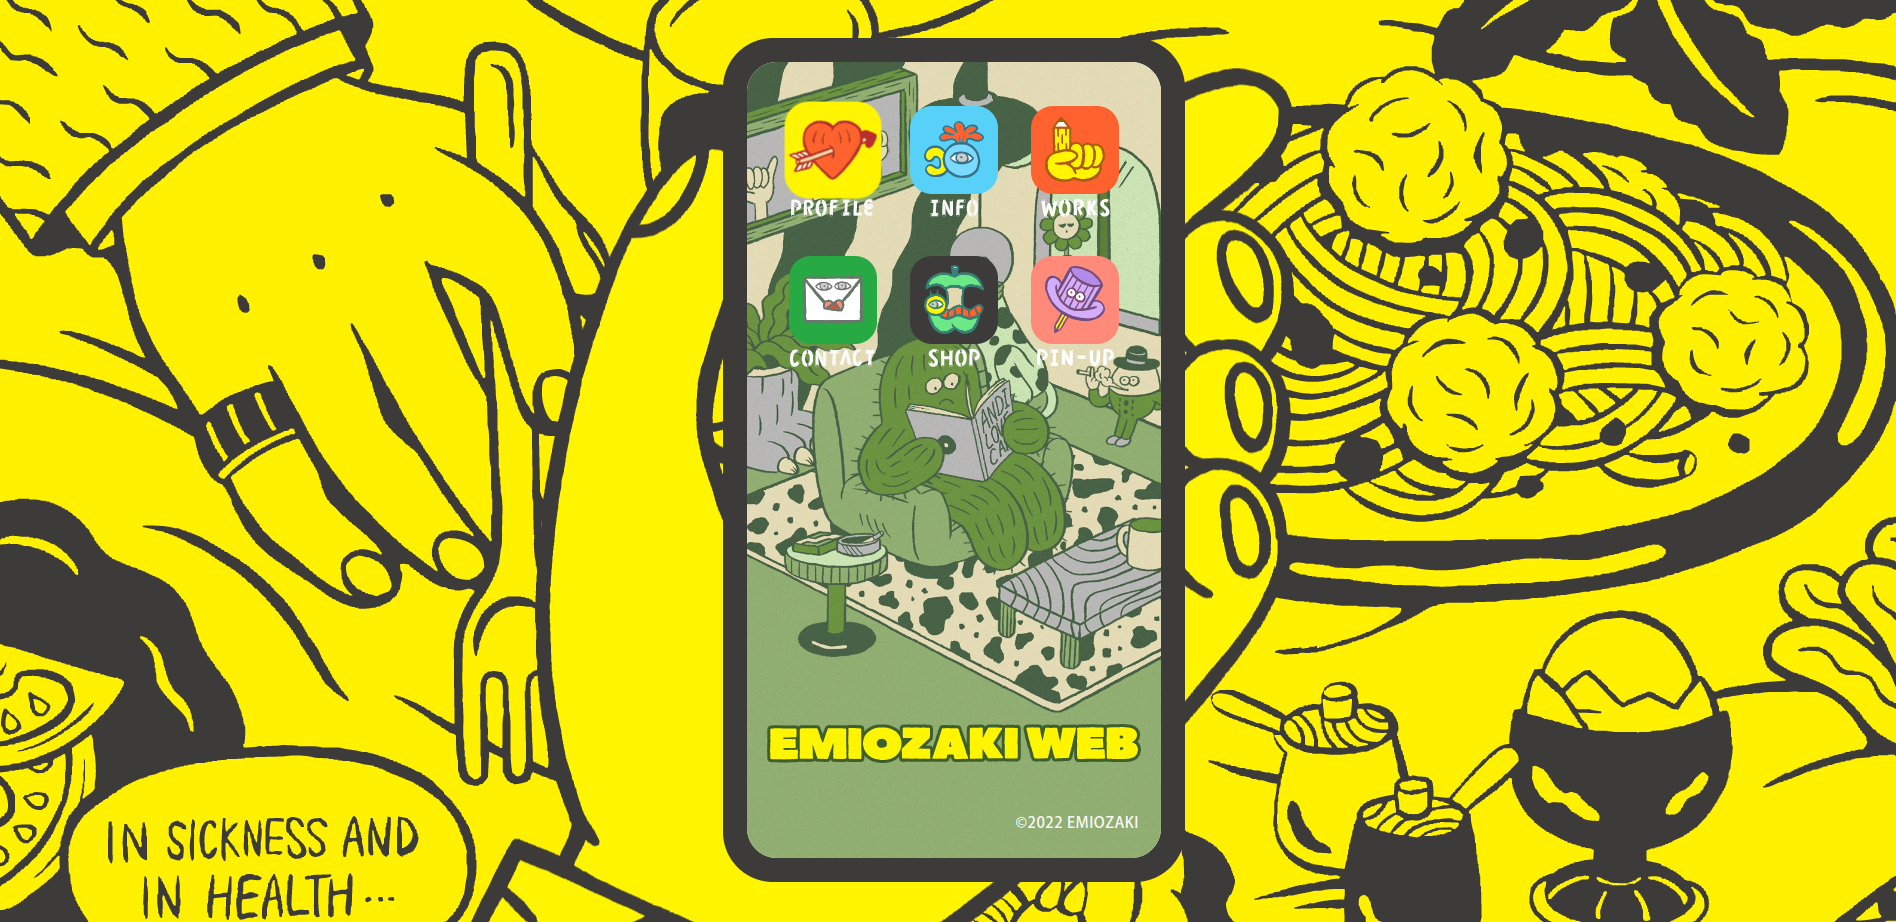 Exploring the Emiozaki ecommerce website resembles interacting with a mobile web page